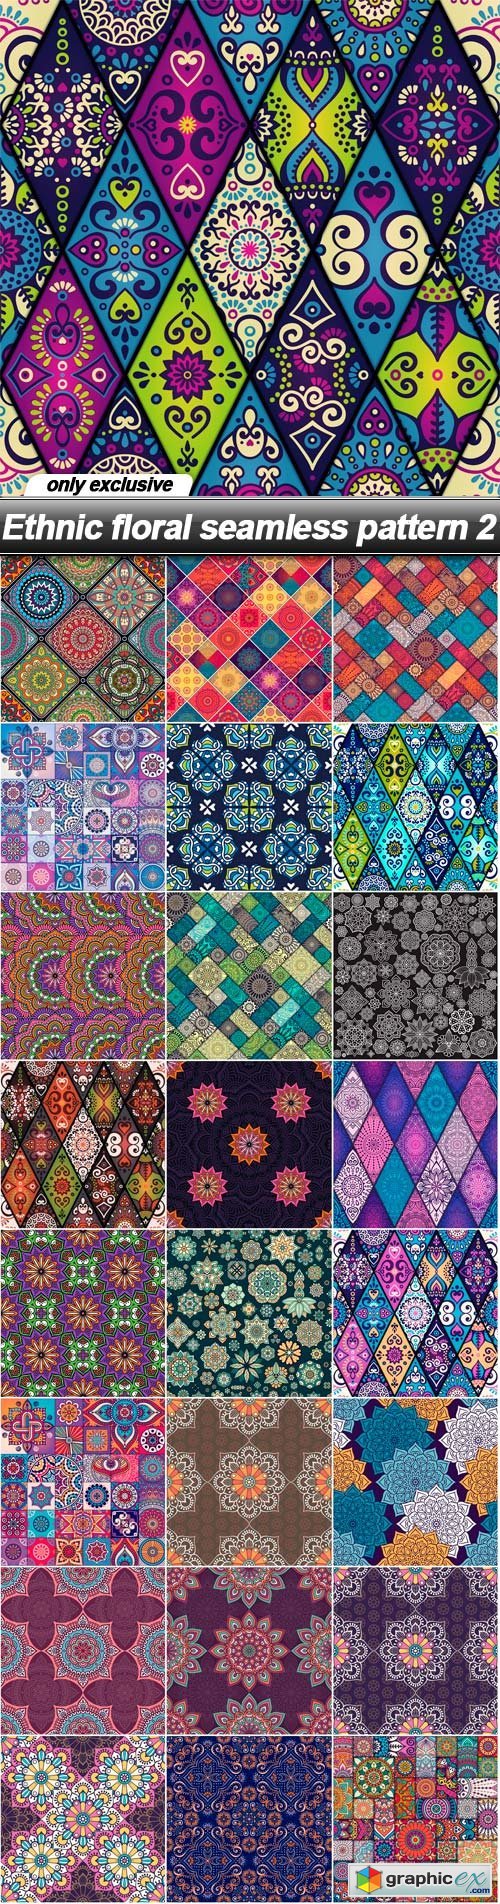 Ethnic floral seamless pattern 2 - 25 EPS